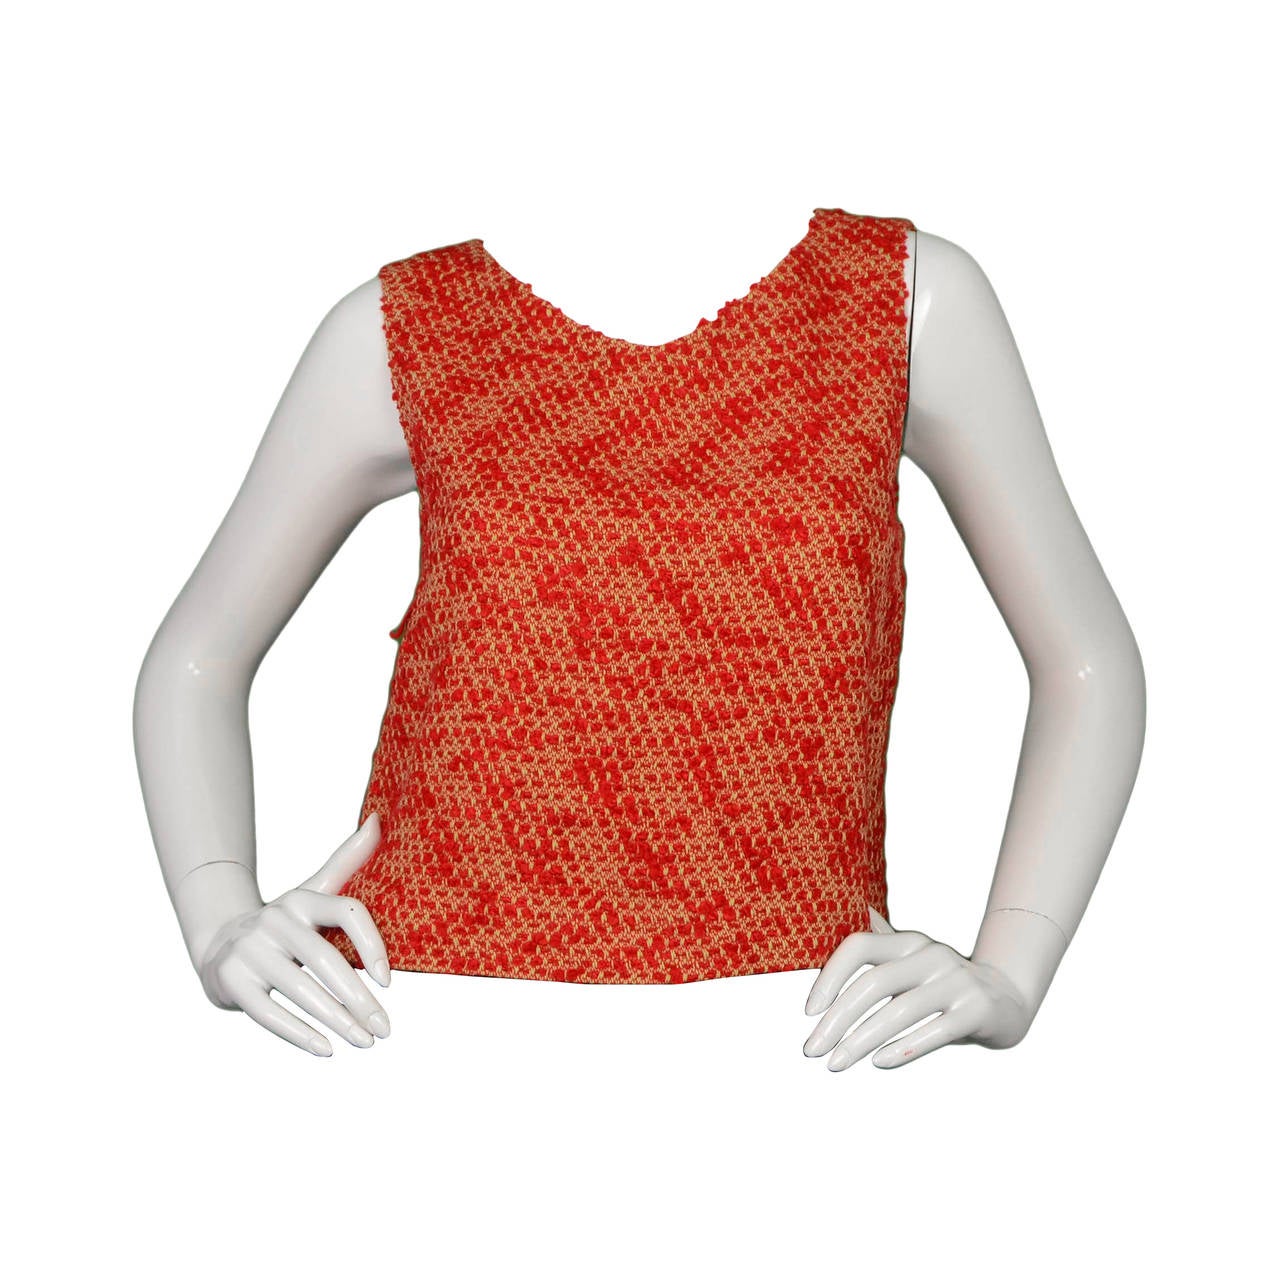 CHANEL Vintage '99 Red & Tan Tweed Shell Top sz 40